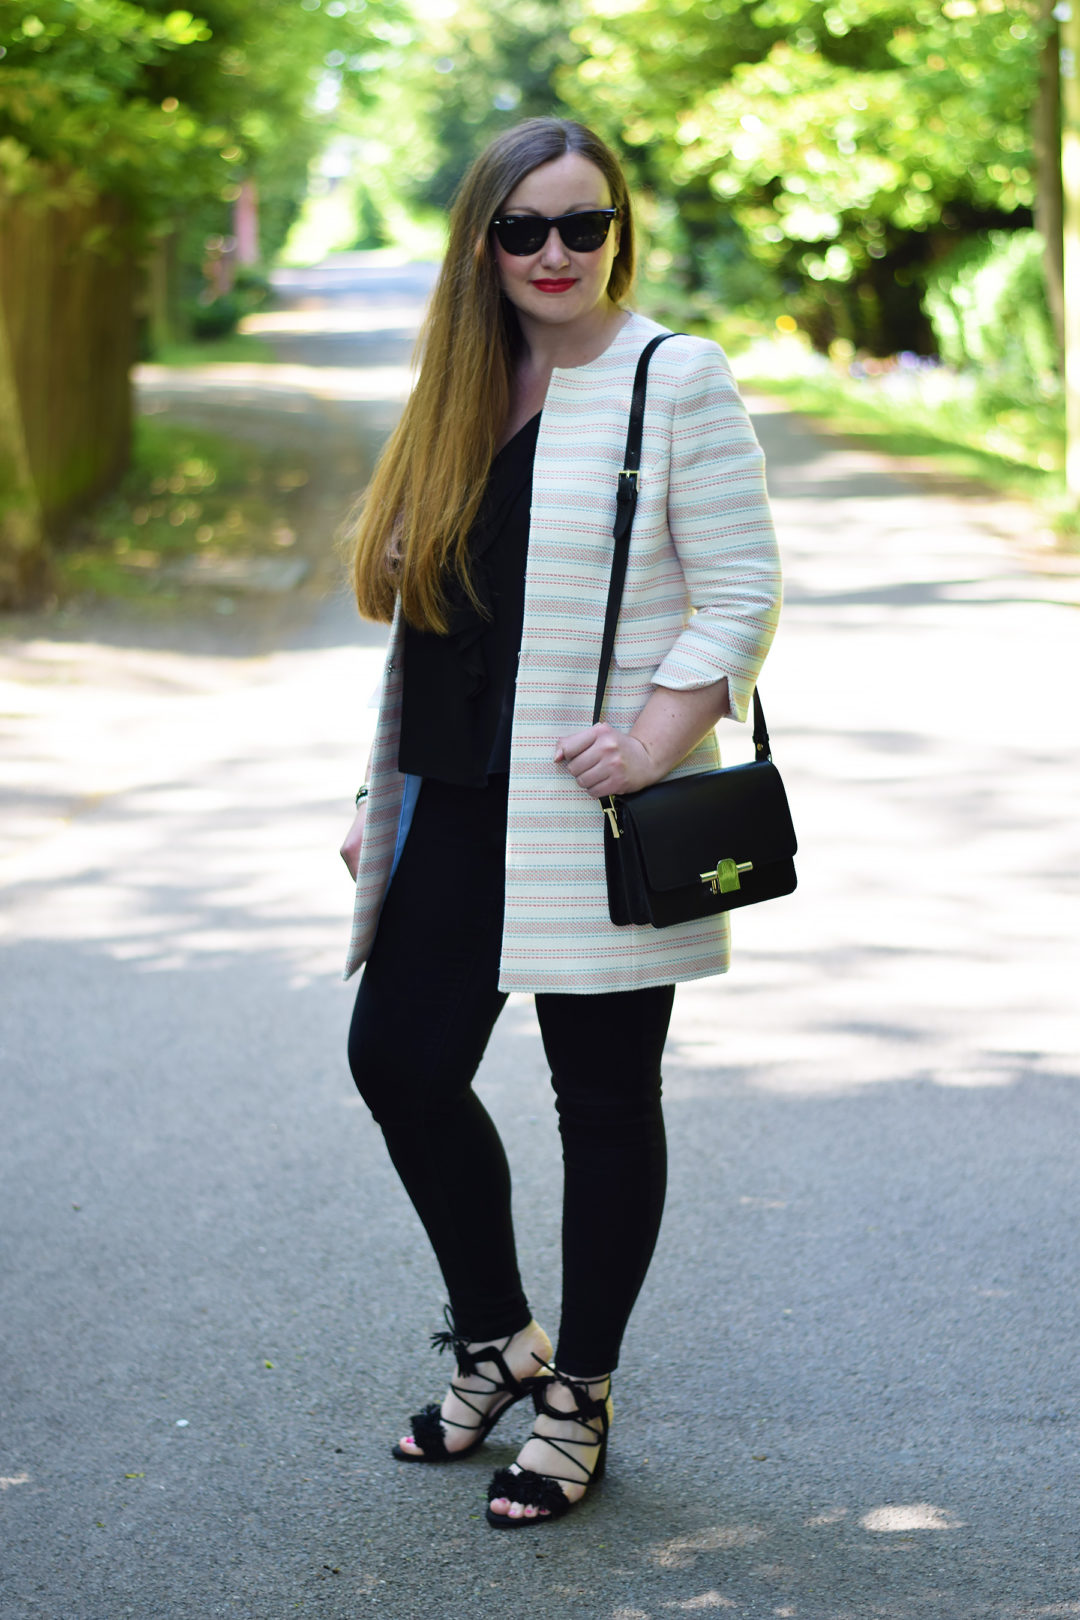 Wearing Black Sandals And Black Bag In The Summer – JacquardFlower